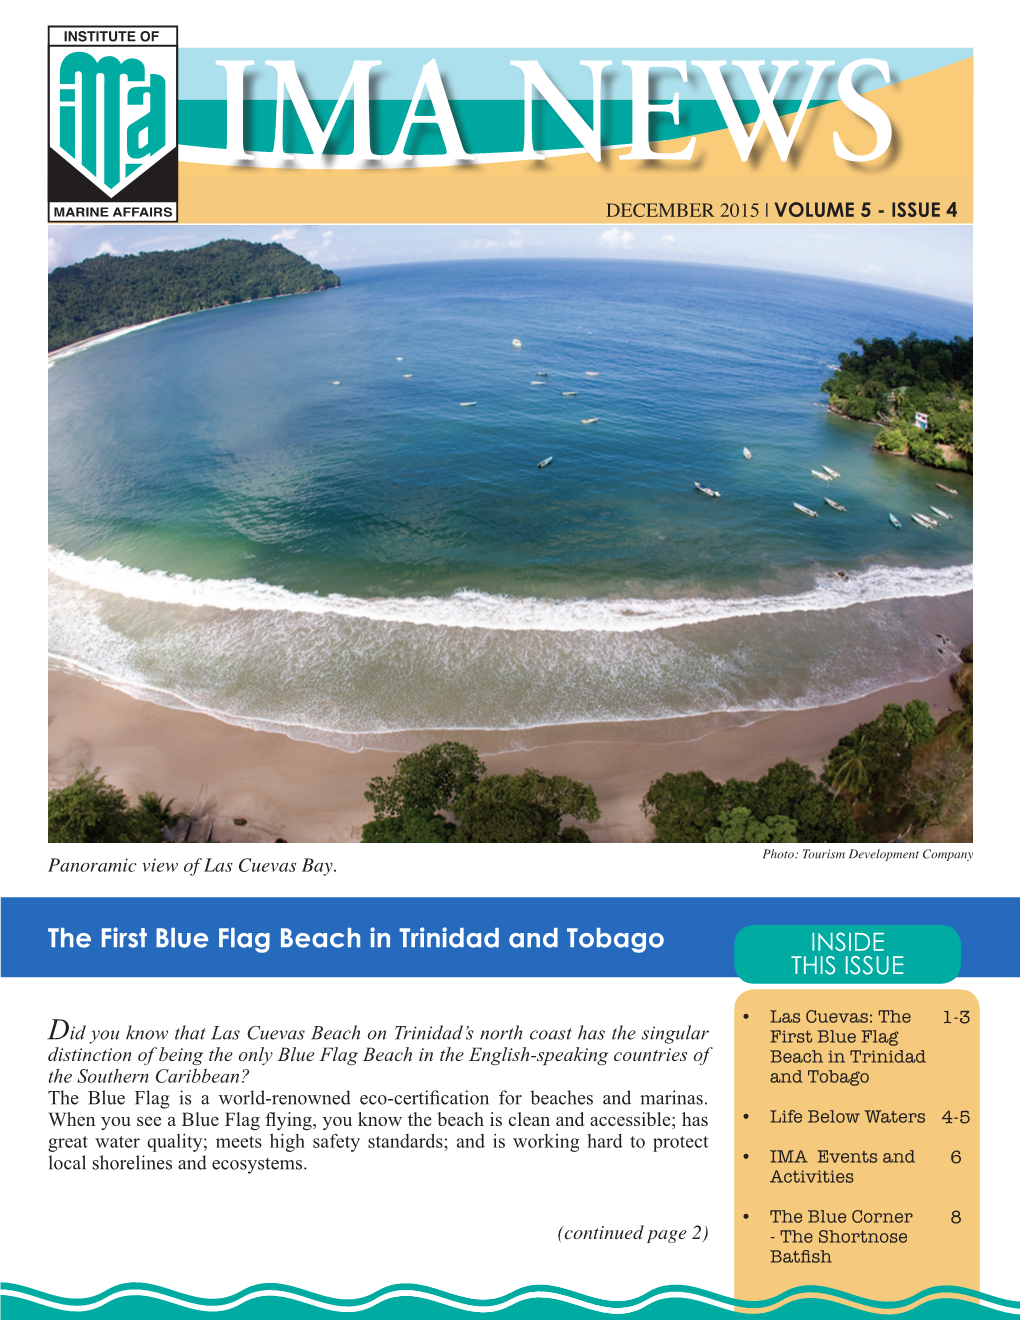 The First Blue Flag Beach in Trinidad and Tobago